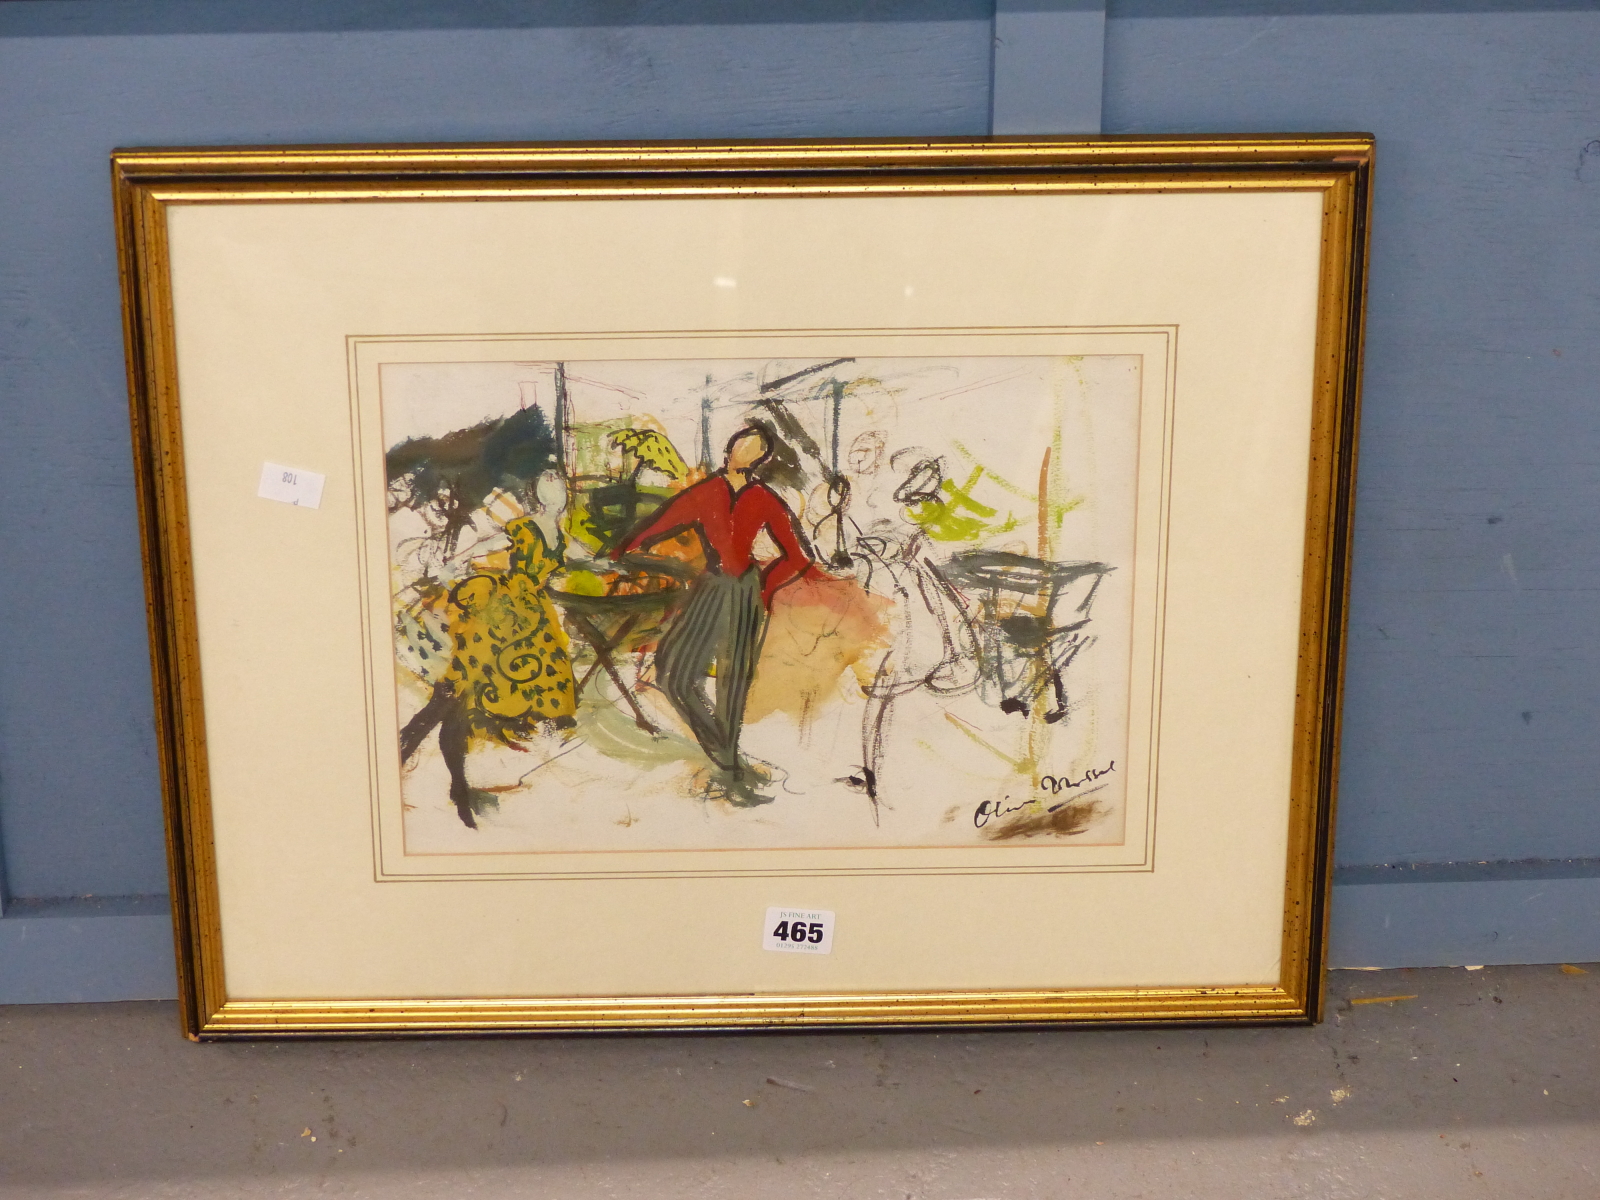 OLIVER MESSEL (1904-1978) ARR, FASHIONABLE FIGURES IN A CAFE, INDISTINCTLY SIGNED, GOUACHE, 31.5 x - Image 6 of 7